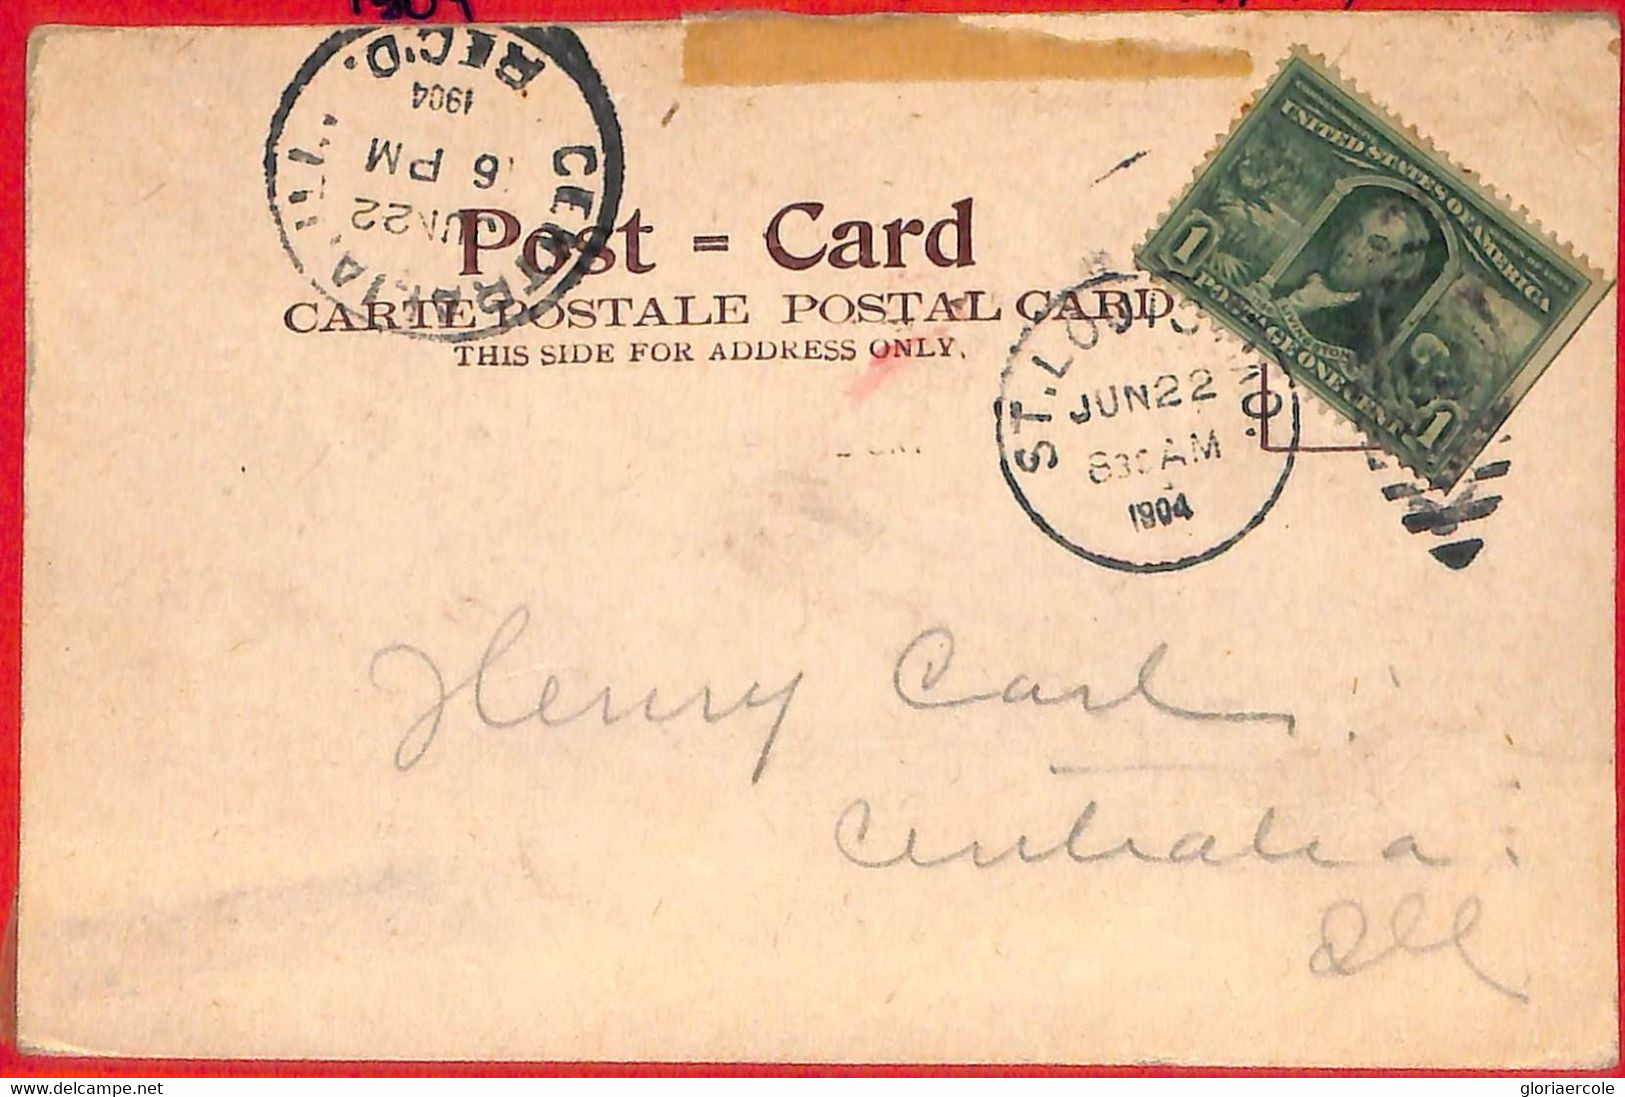 Aa2569 - USA - POSTAL HISTORY - CARD From ST LOUIS 9 Days B4 1904 Olympic Games - Ete 1904: St-Louis